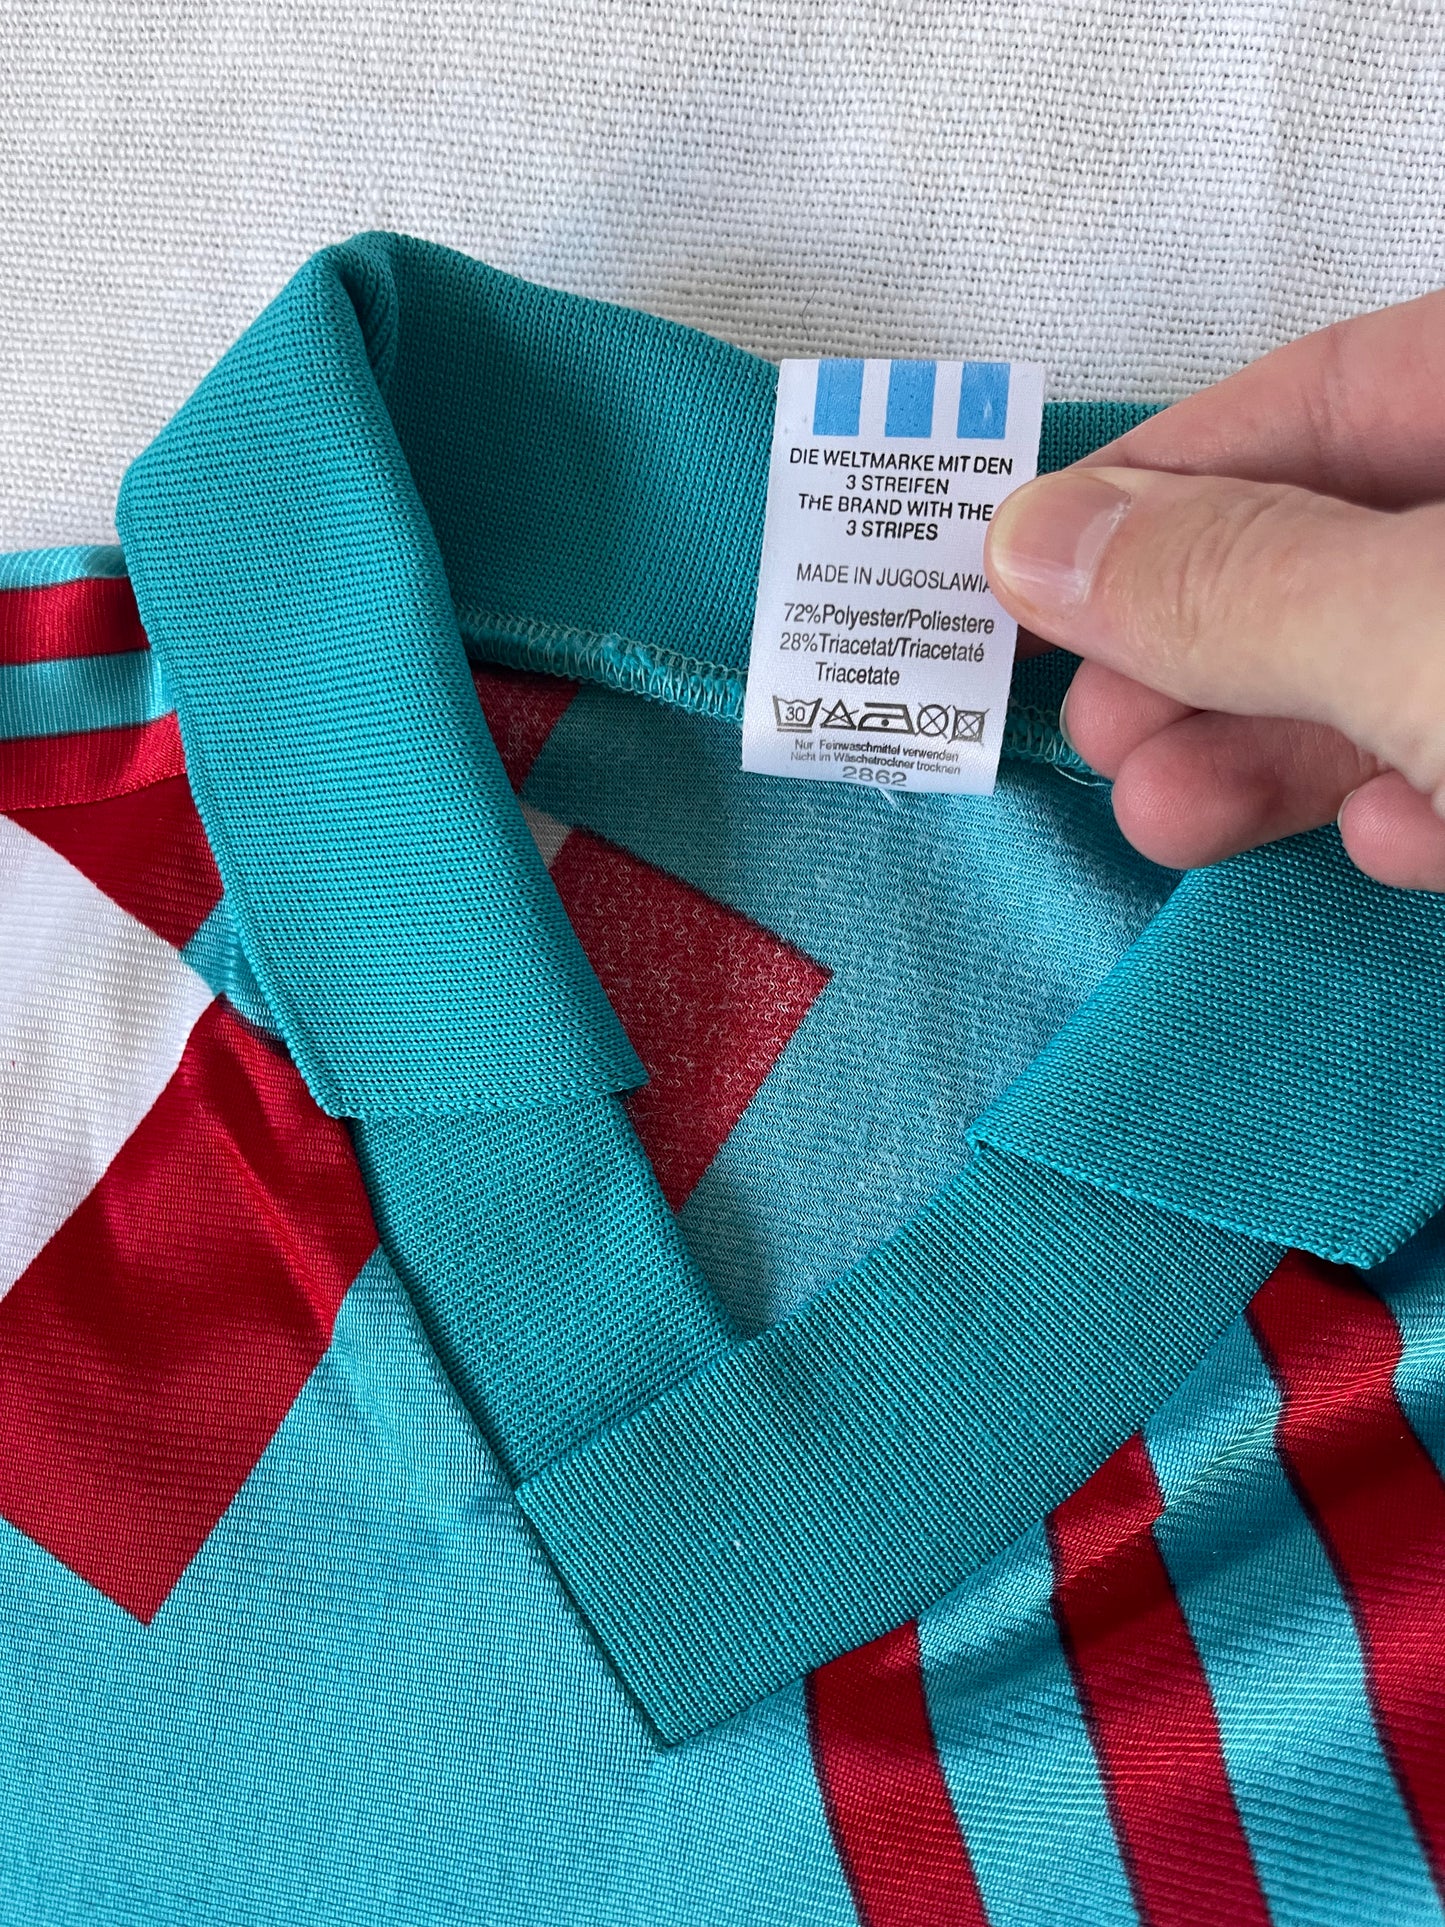 Vintage Adidas Football Shirt 1991 Russia Soviet Union Template Size M Made in Yugoslavia Turquoise Black White Red